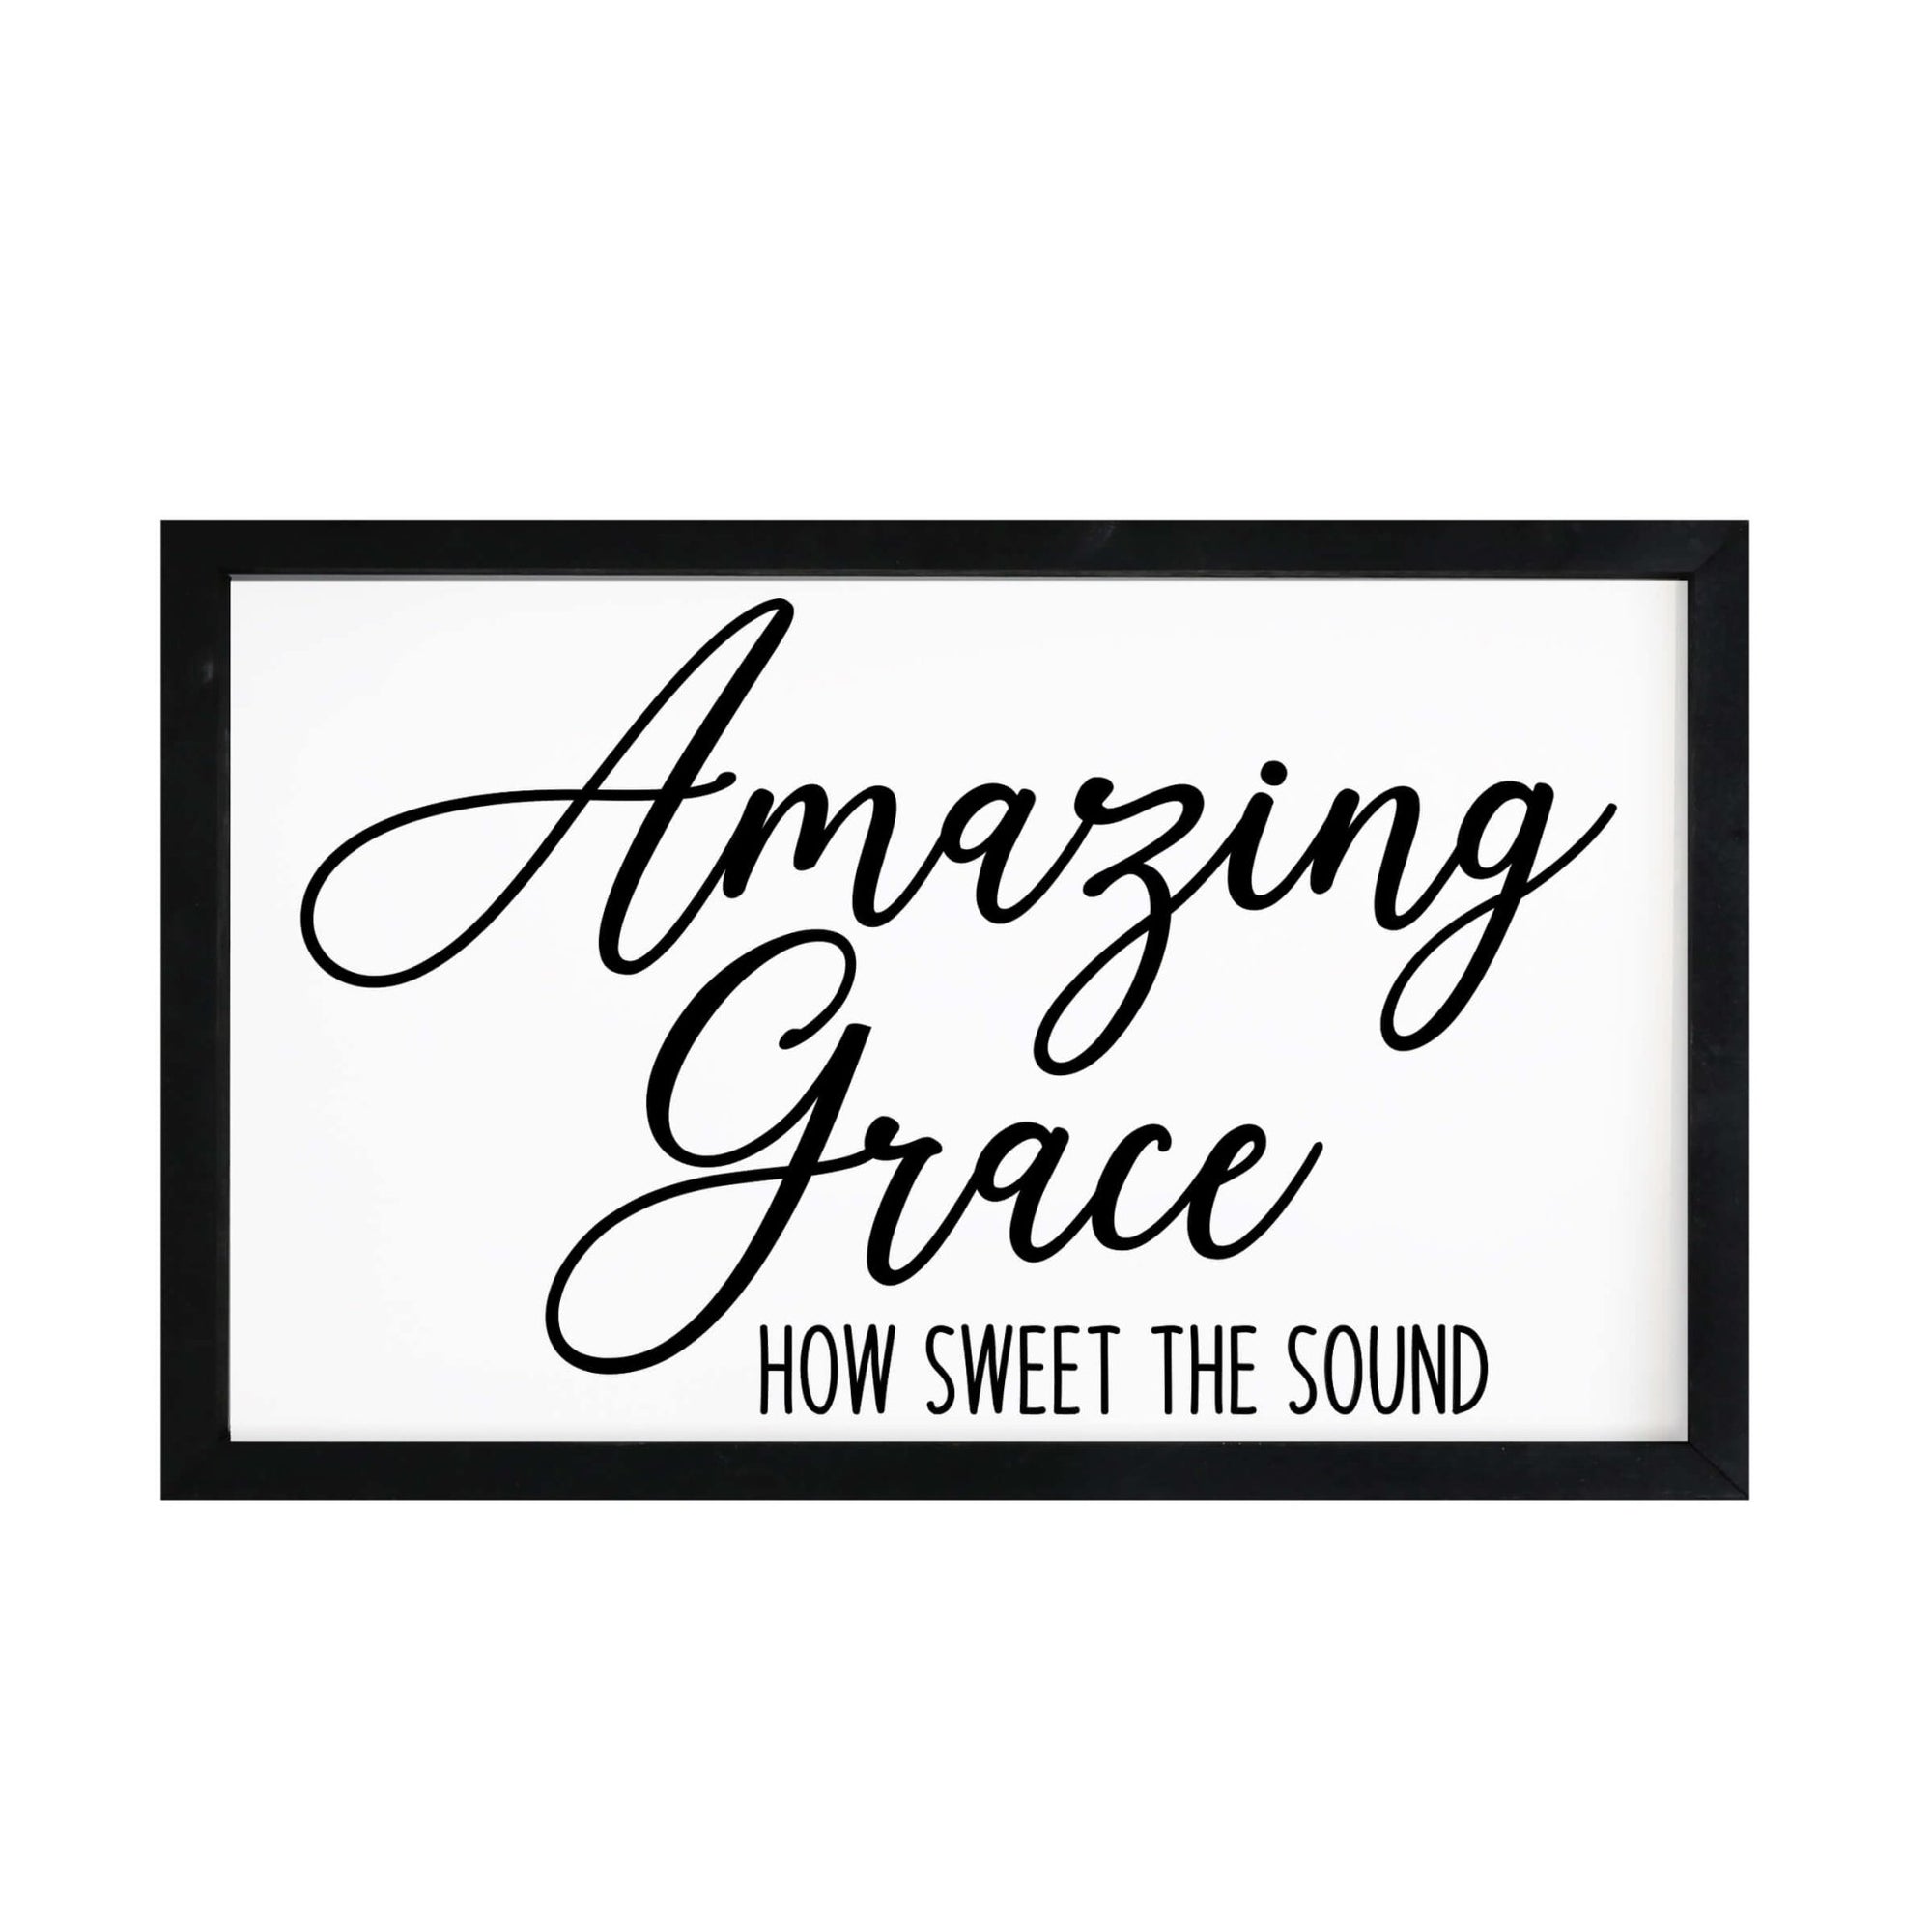 Framed Shadow Box White Church Wall Décor – Amazing Grace - LifeSong Milestones